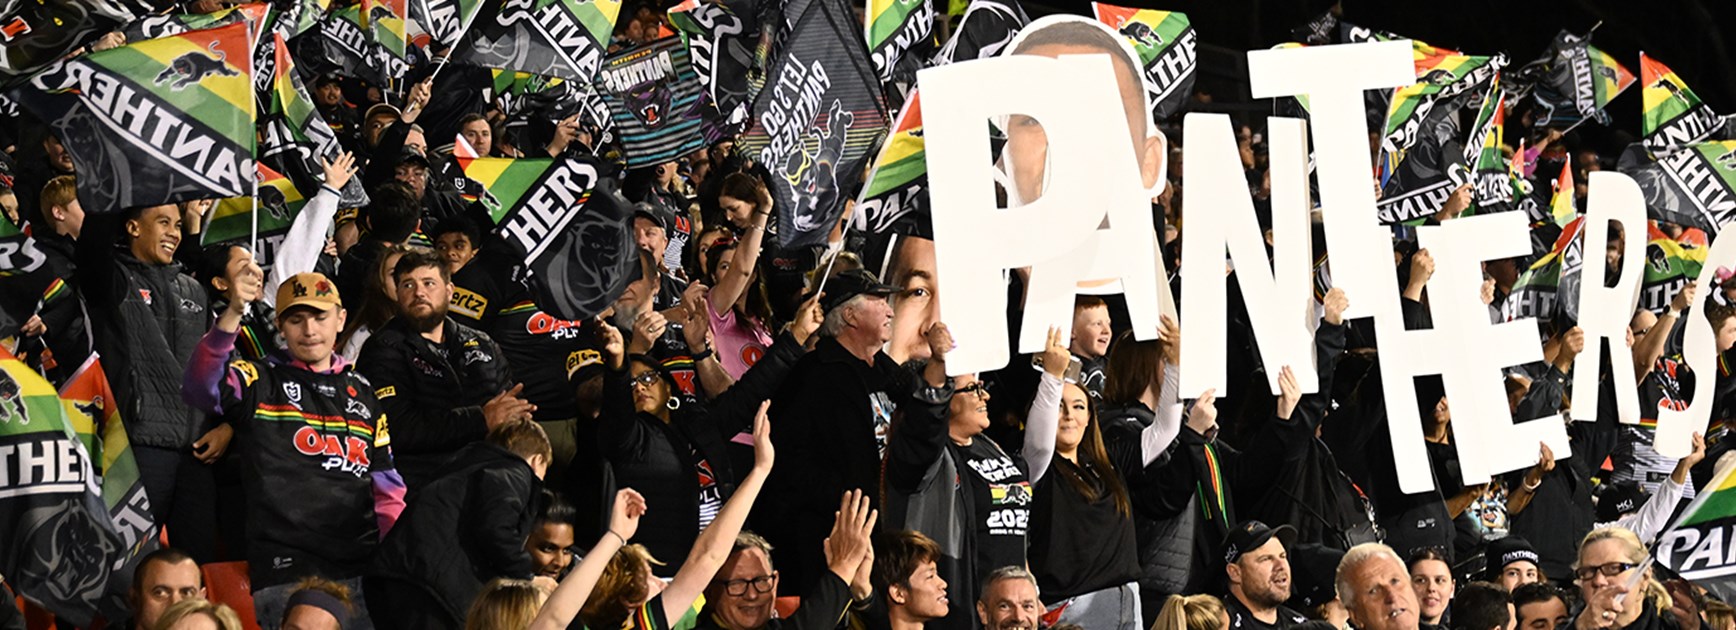 A sea of black: Panthers' fans on the verge of breaking 20-year record